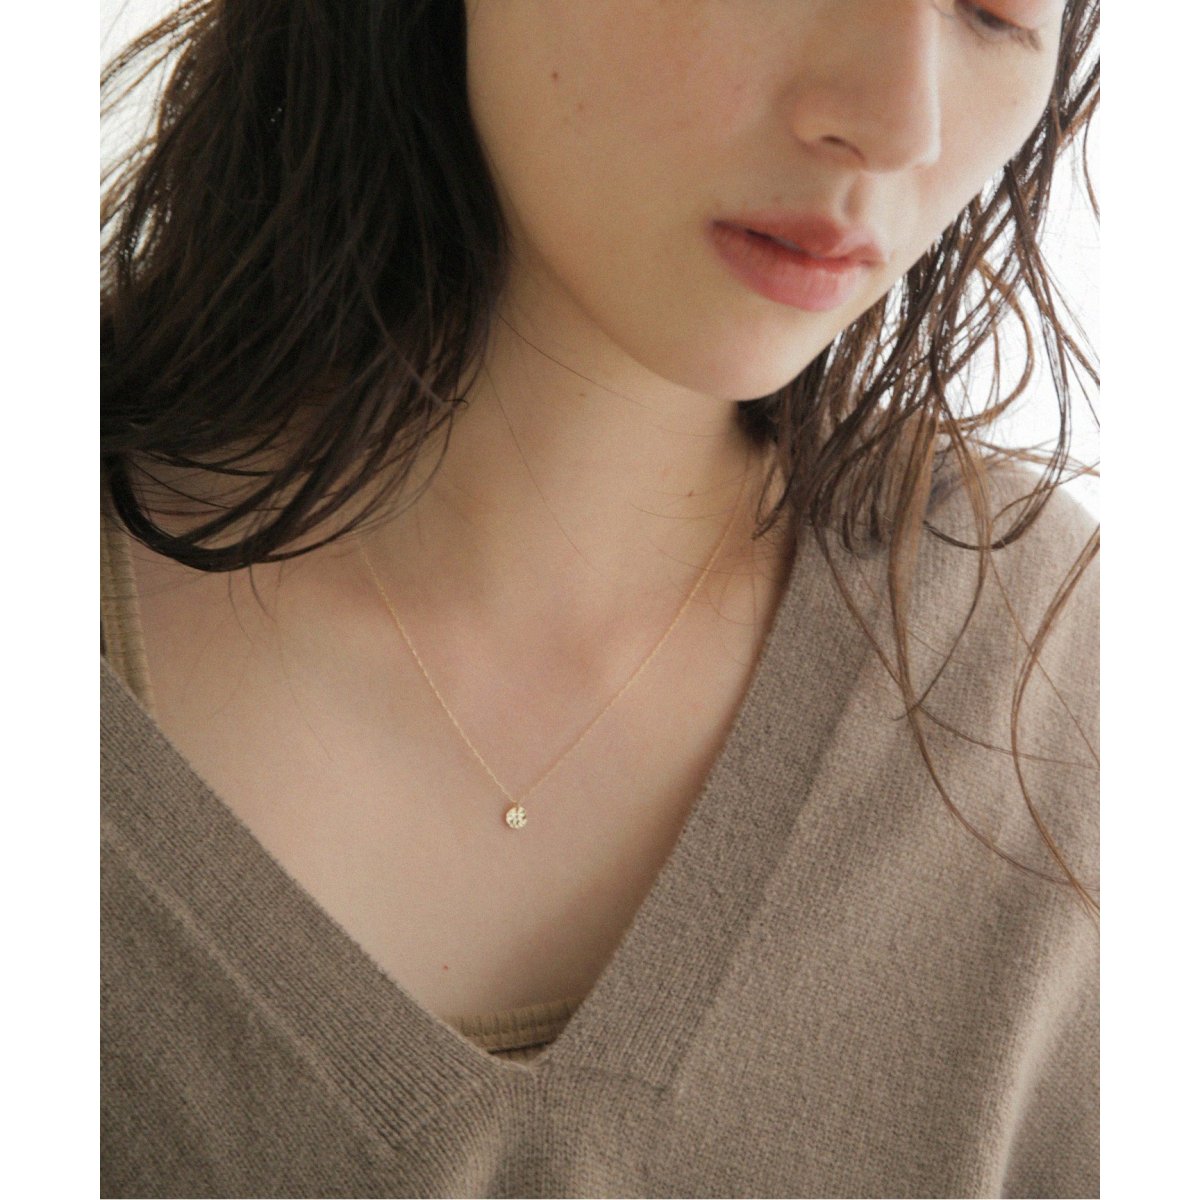 LES BONBON/ル ボンボン】 victoria plate necklace：ネックレス 